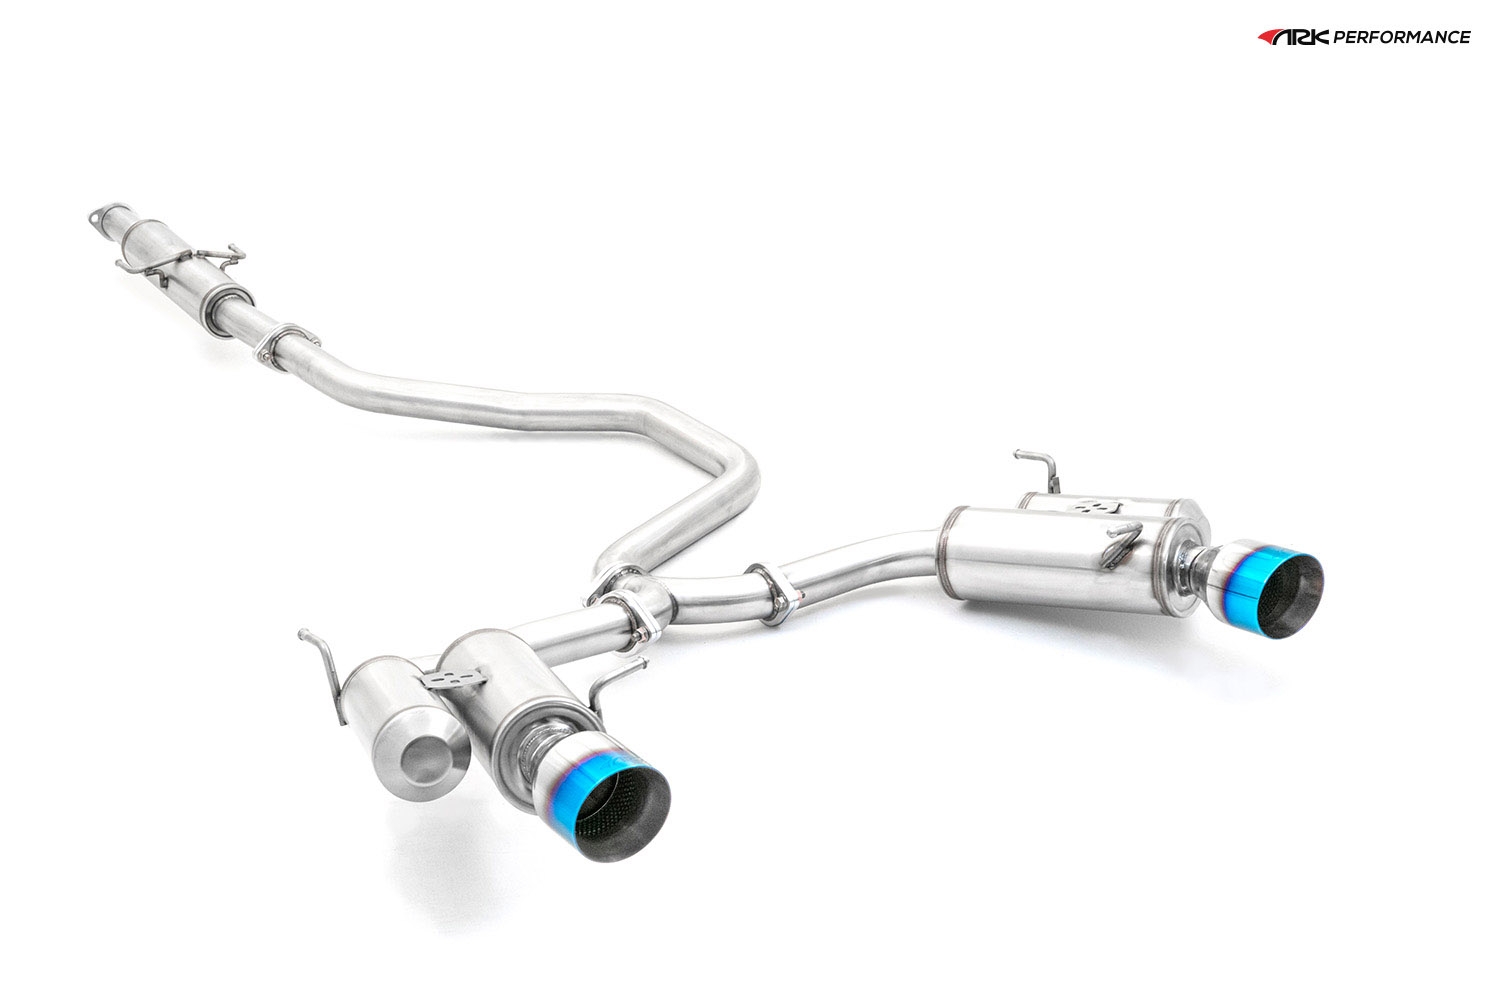 Ark Performance Stainless Steel Dt S Cat Back Exhaust System 2 5in Pipe W 4 5 Burnt Single Tip Dual Exit Hyundai Tiburon 03 08 2 0l I4 2 7l V6 Gk Sm0700 0103d Concept Z Performance